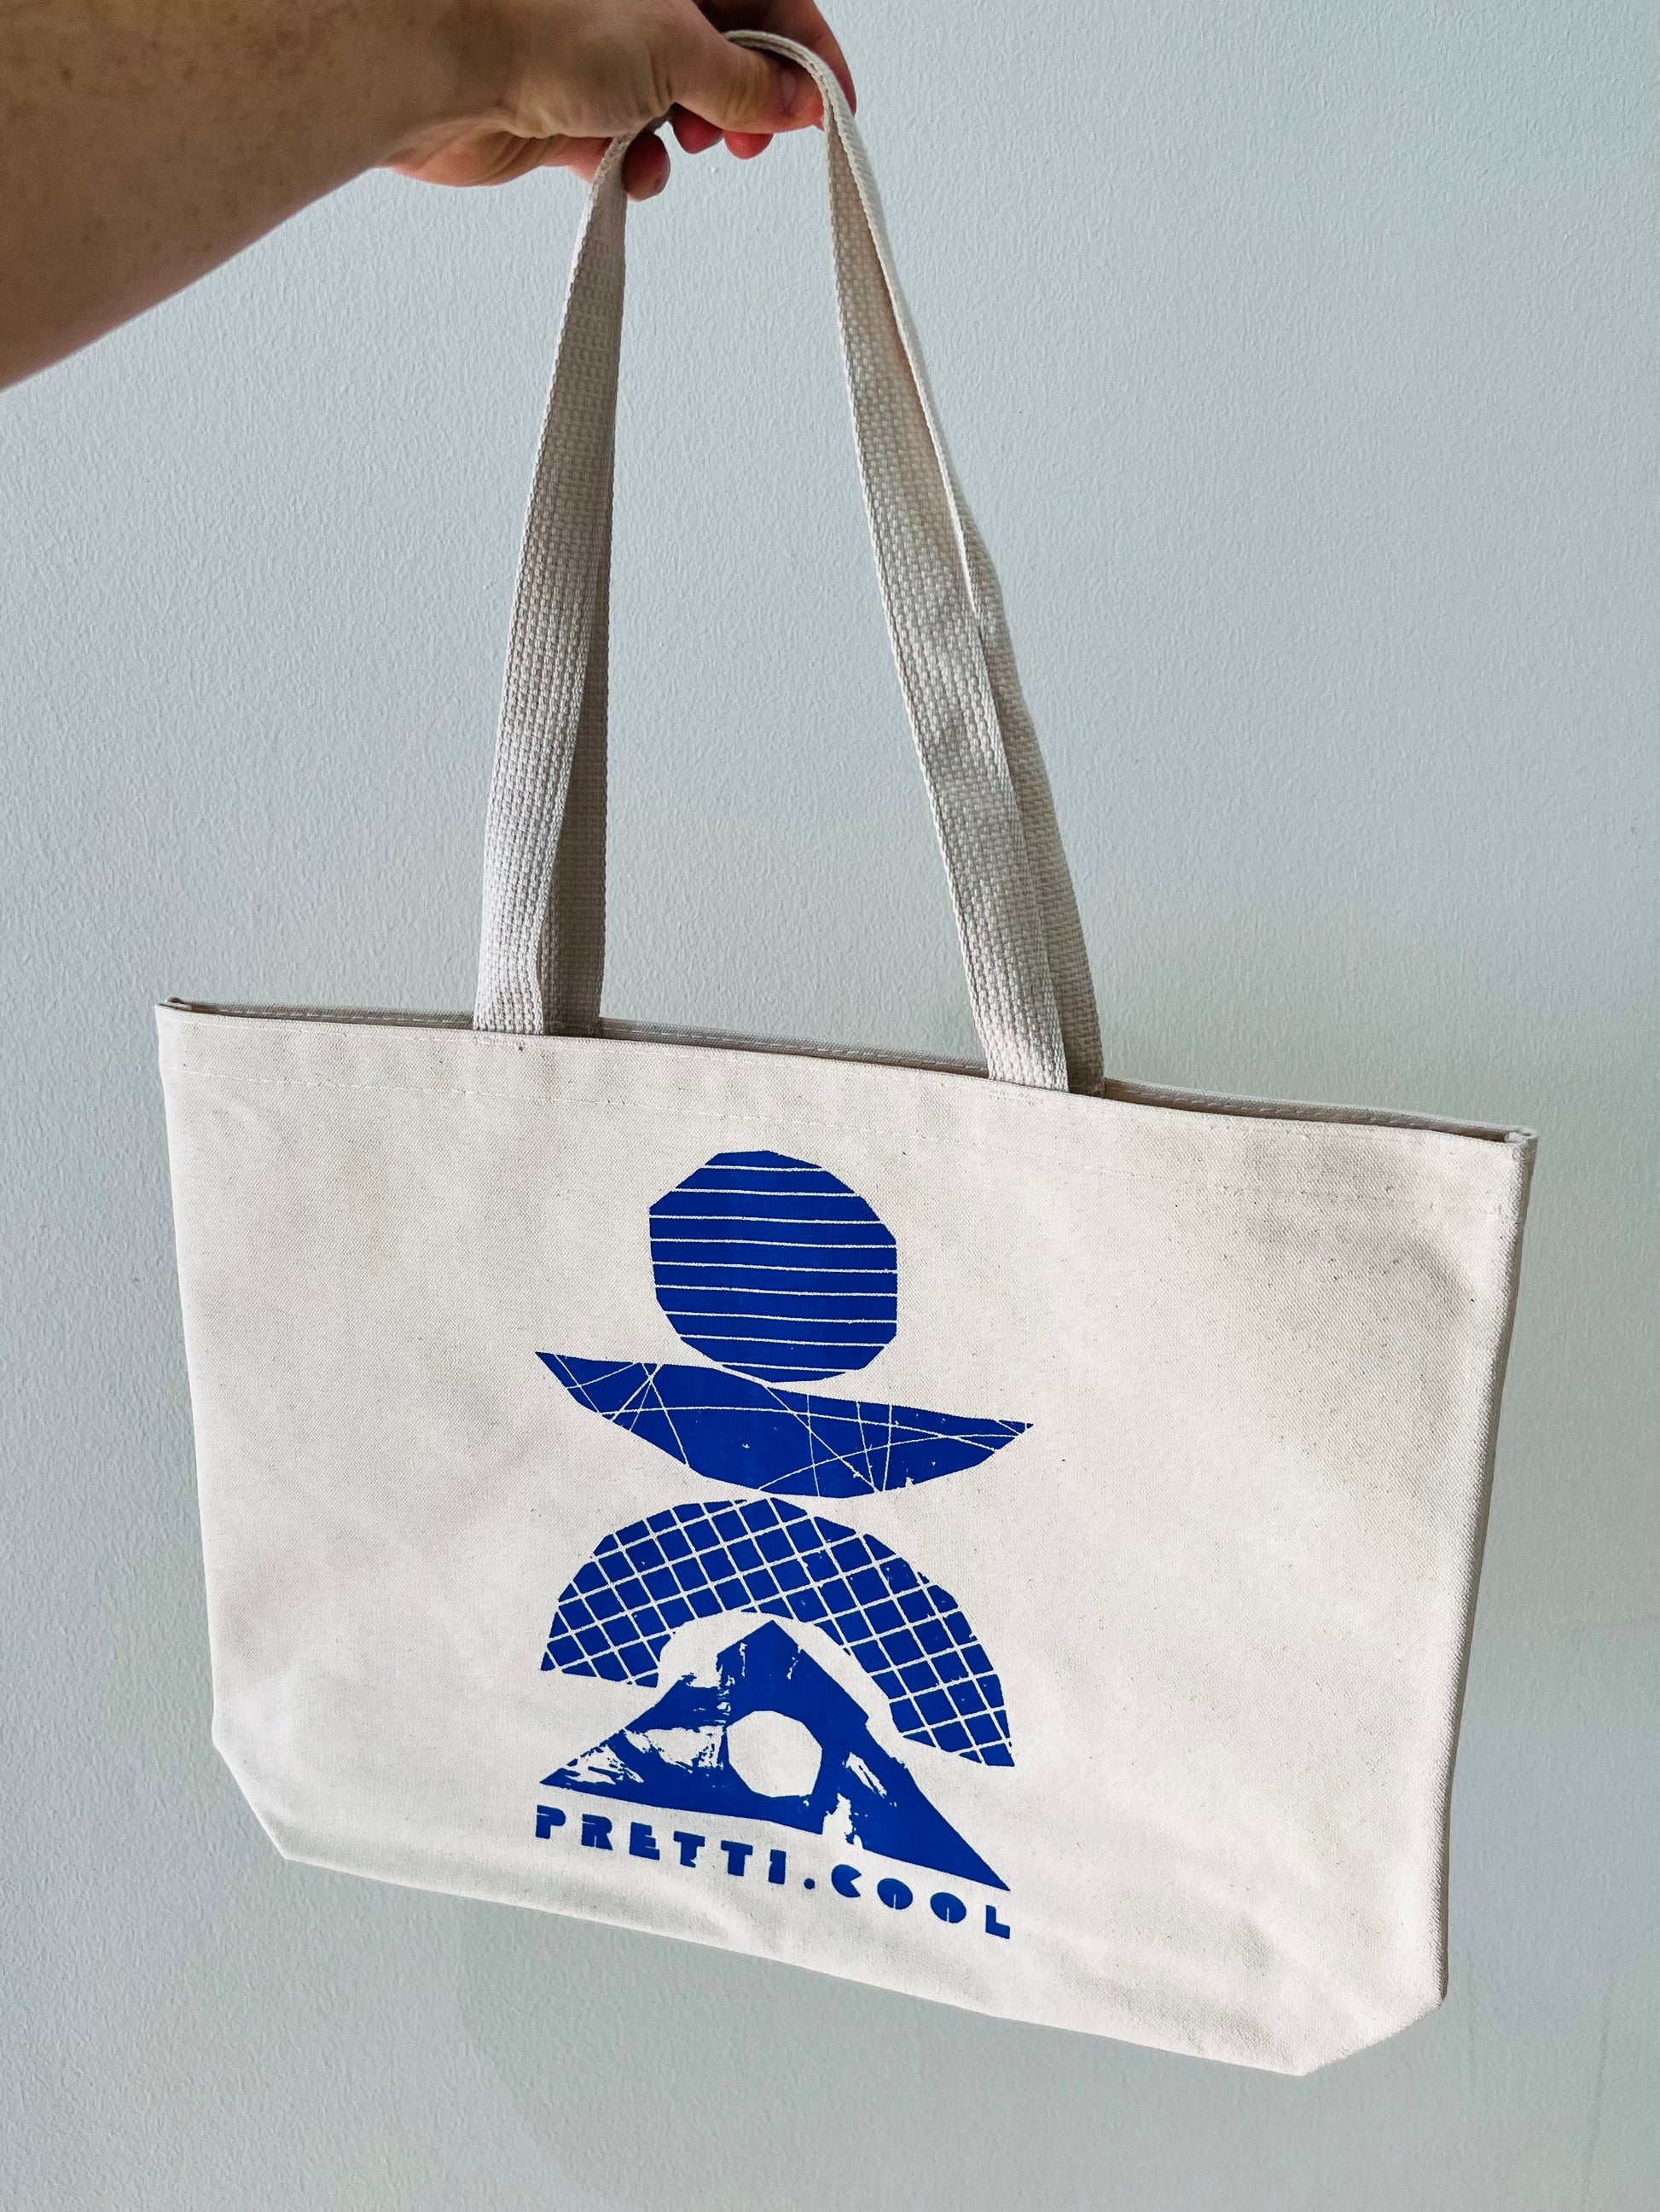 The pretti.cool tote in natural canvas w/ a cobalt print on the front.